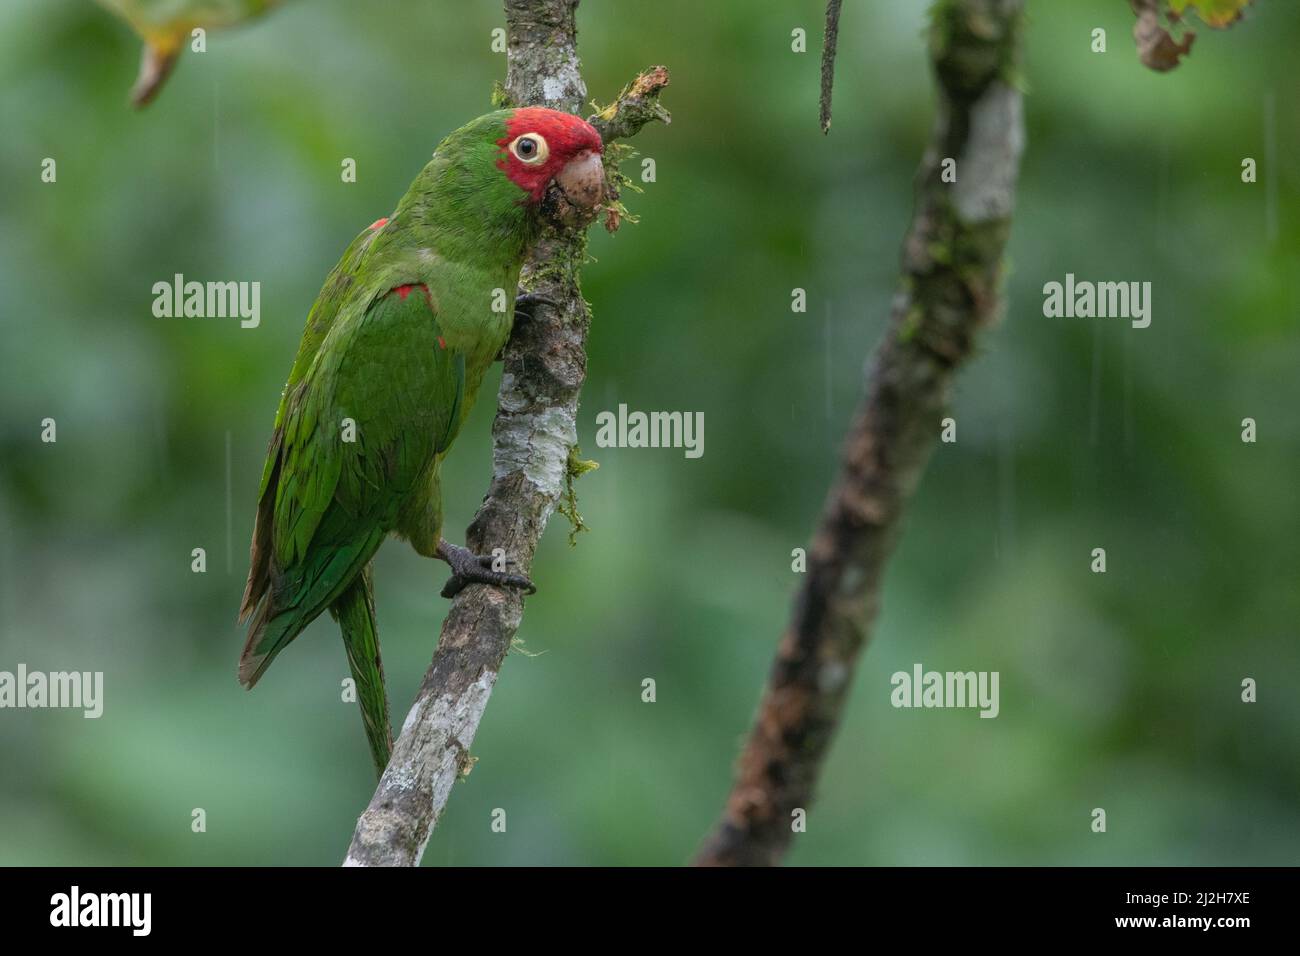 red-masked parakeet (Psittacara erythrogenys), a colorful and beautiful parrot species from the rainforests of South America. Stock Photo